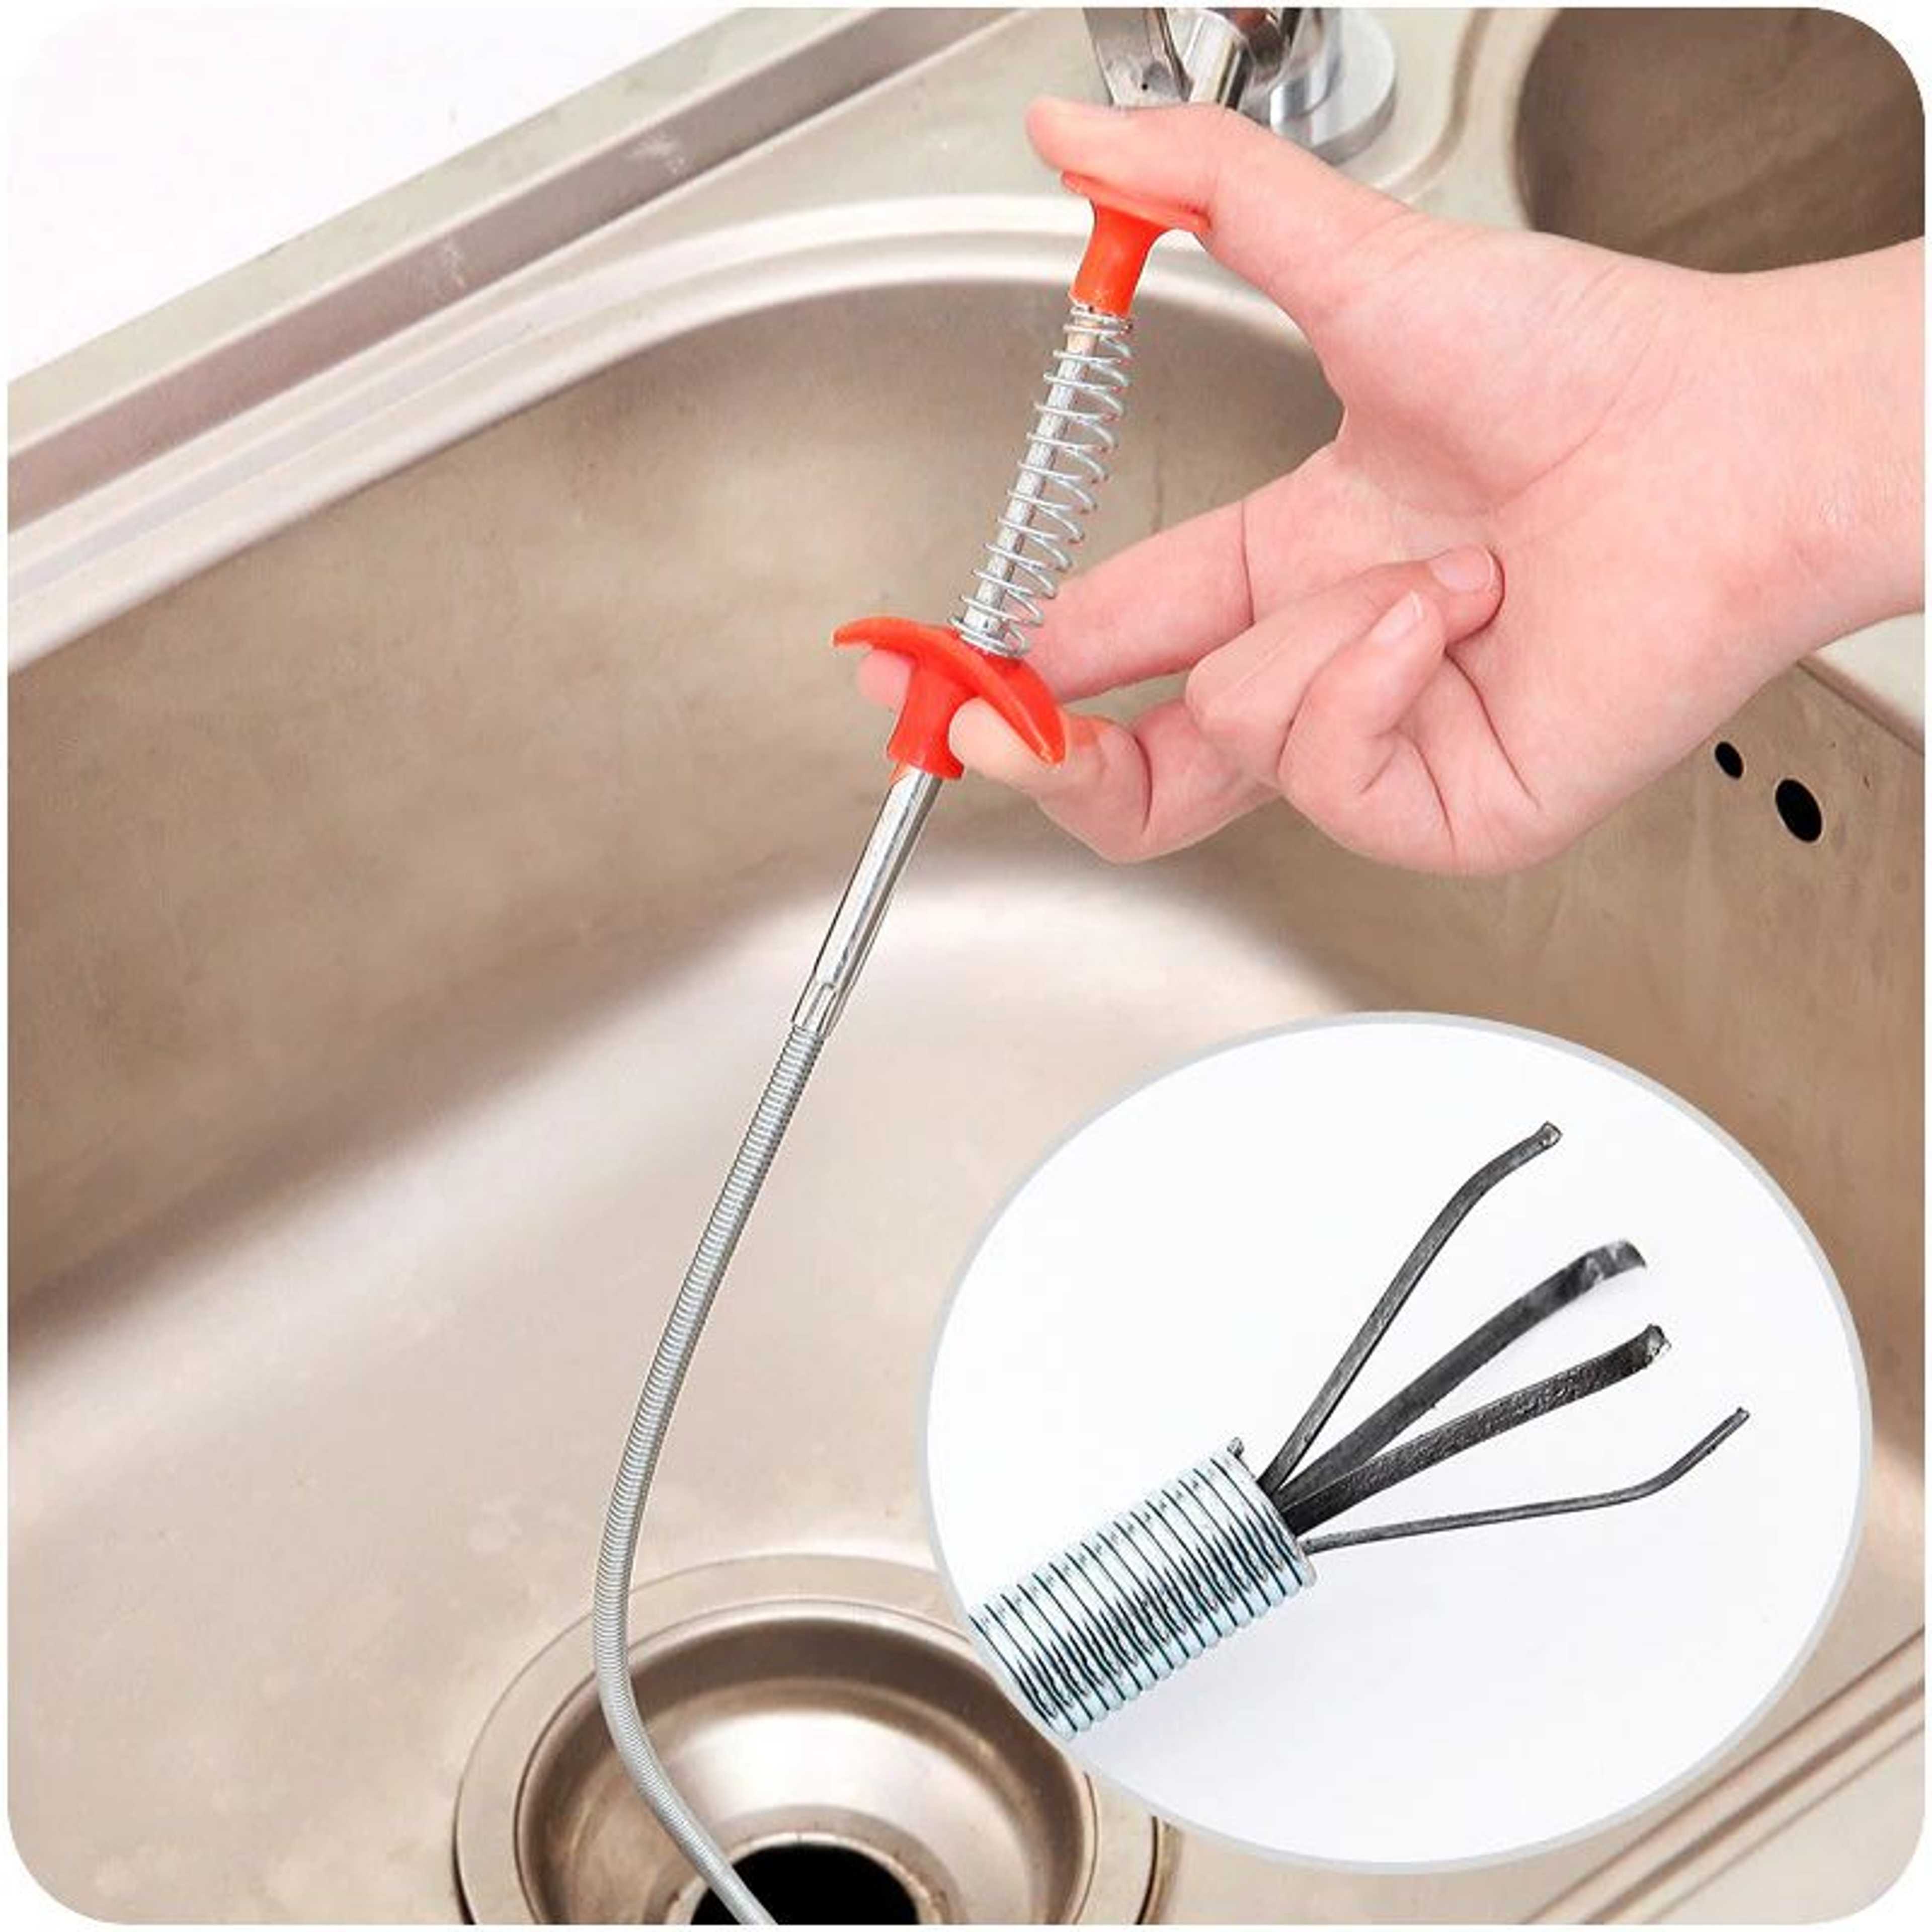 Metal wire brush Hand Kitchen Sink Cleaning Hook Sewer Dredging Device Spring Pipe Hair Dredging Tool Metal wire brush